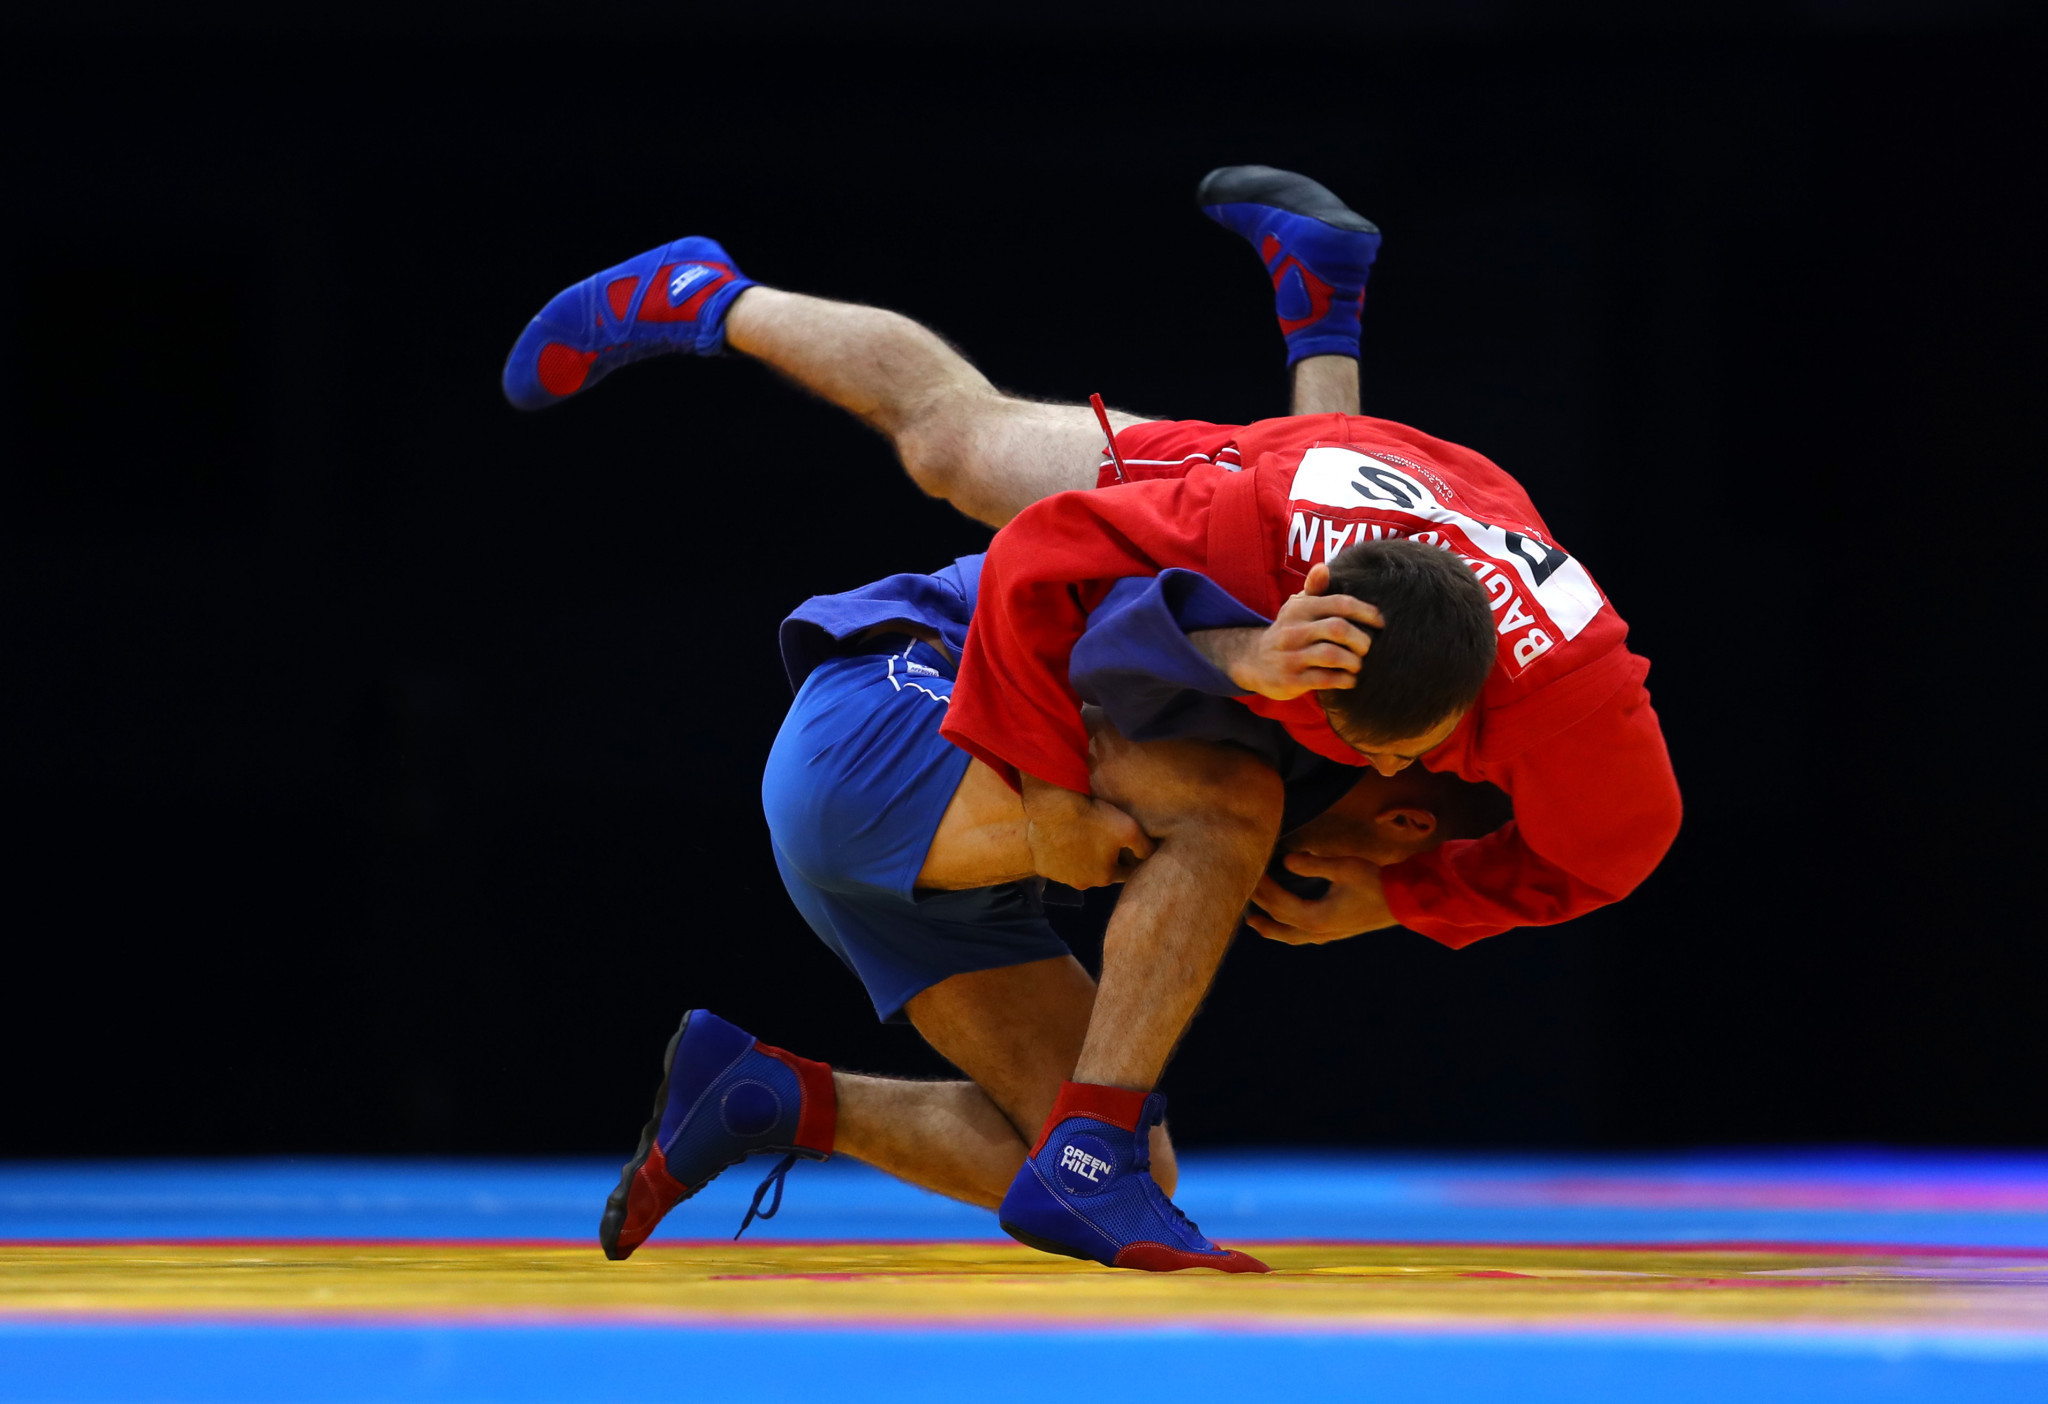 The World Sambo Championships are due to be held from November 12 to 14 in Tashkent ©Getty Images